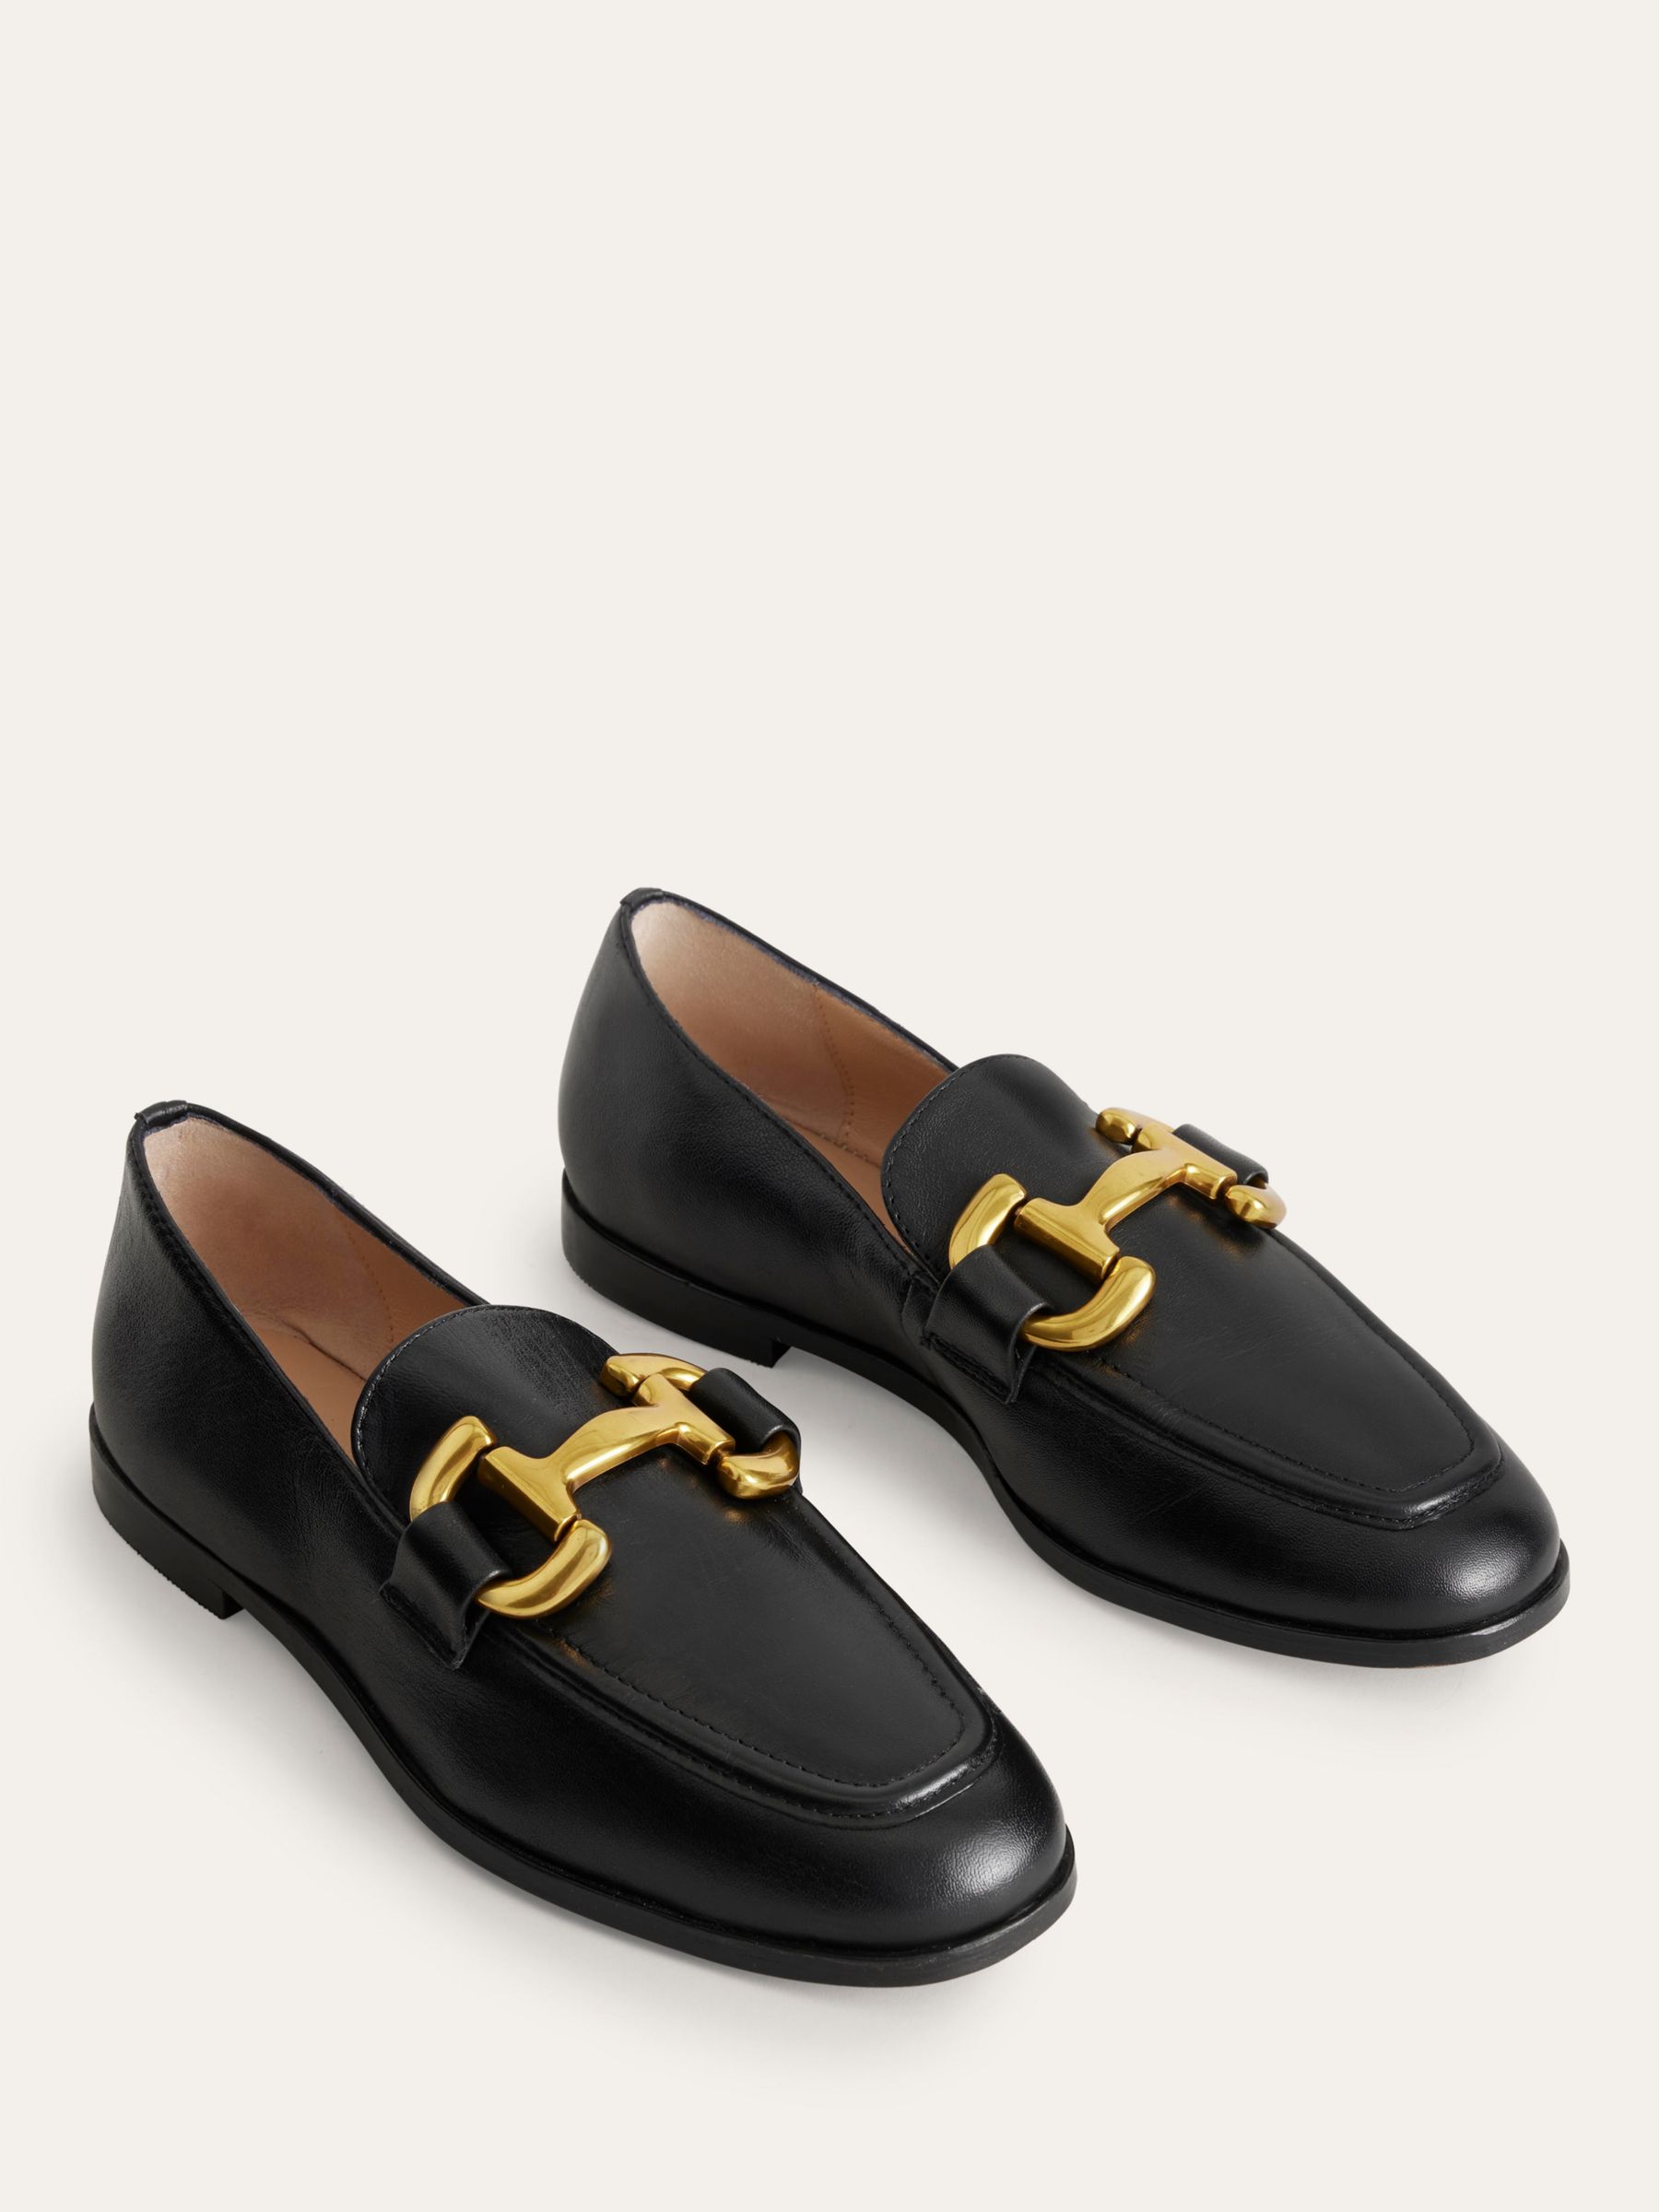 Boden Iris Leather Snaffle Trim Loafers, Black at John Lewis & Partners